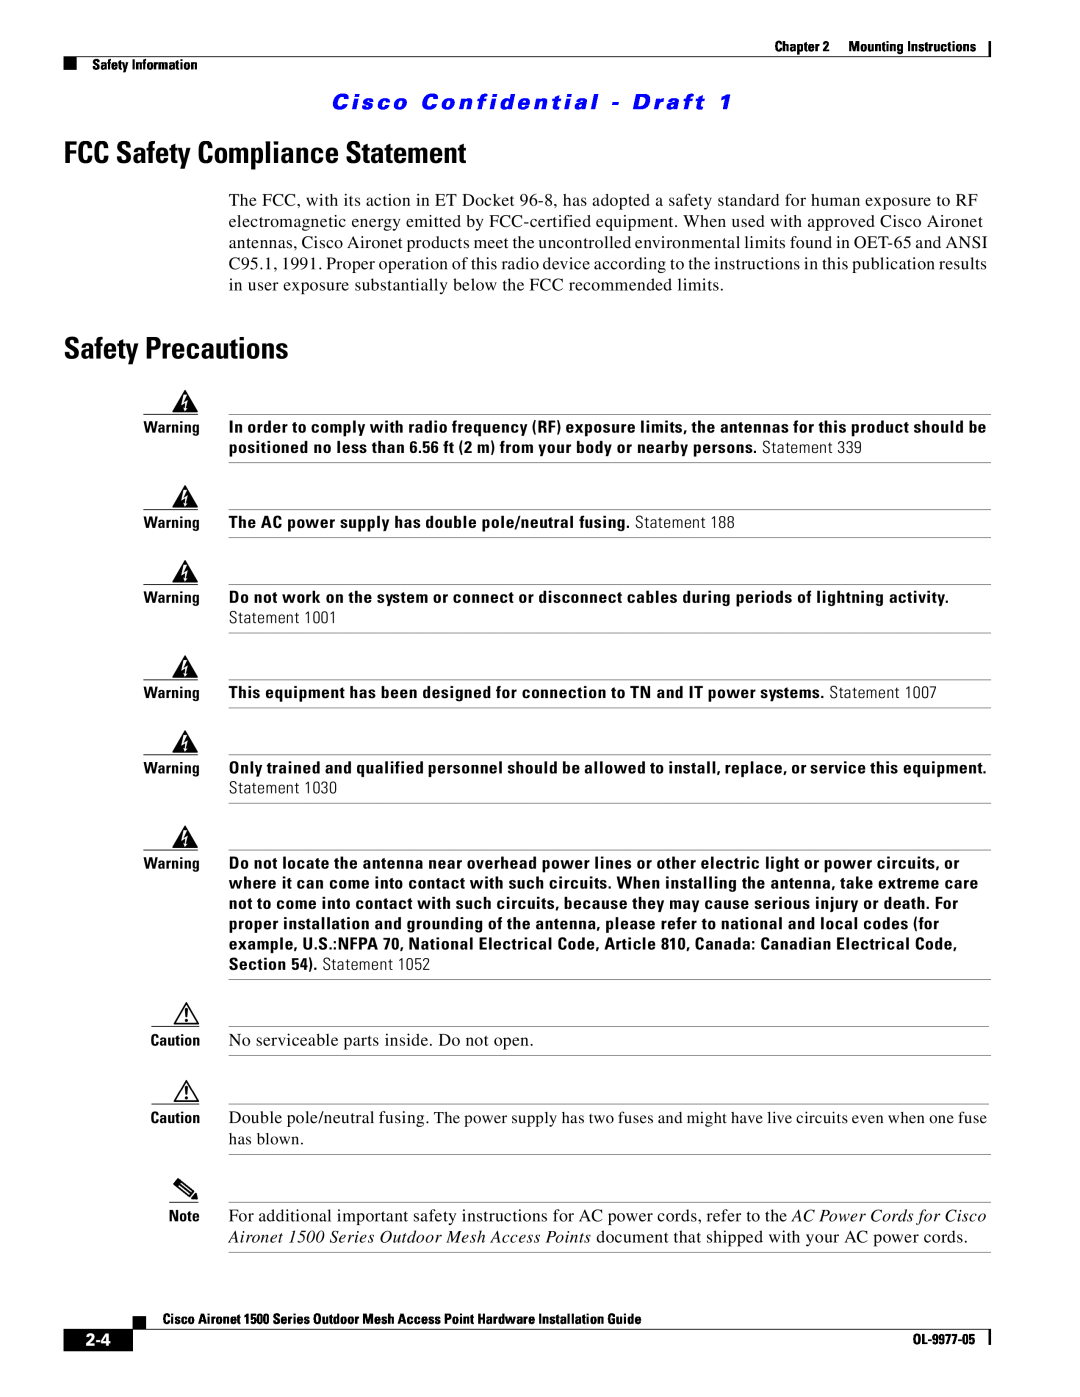 Cisco Systems 1500 Series manual FCC Safety Compliance Statement, Safety Precautions 